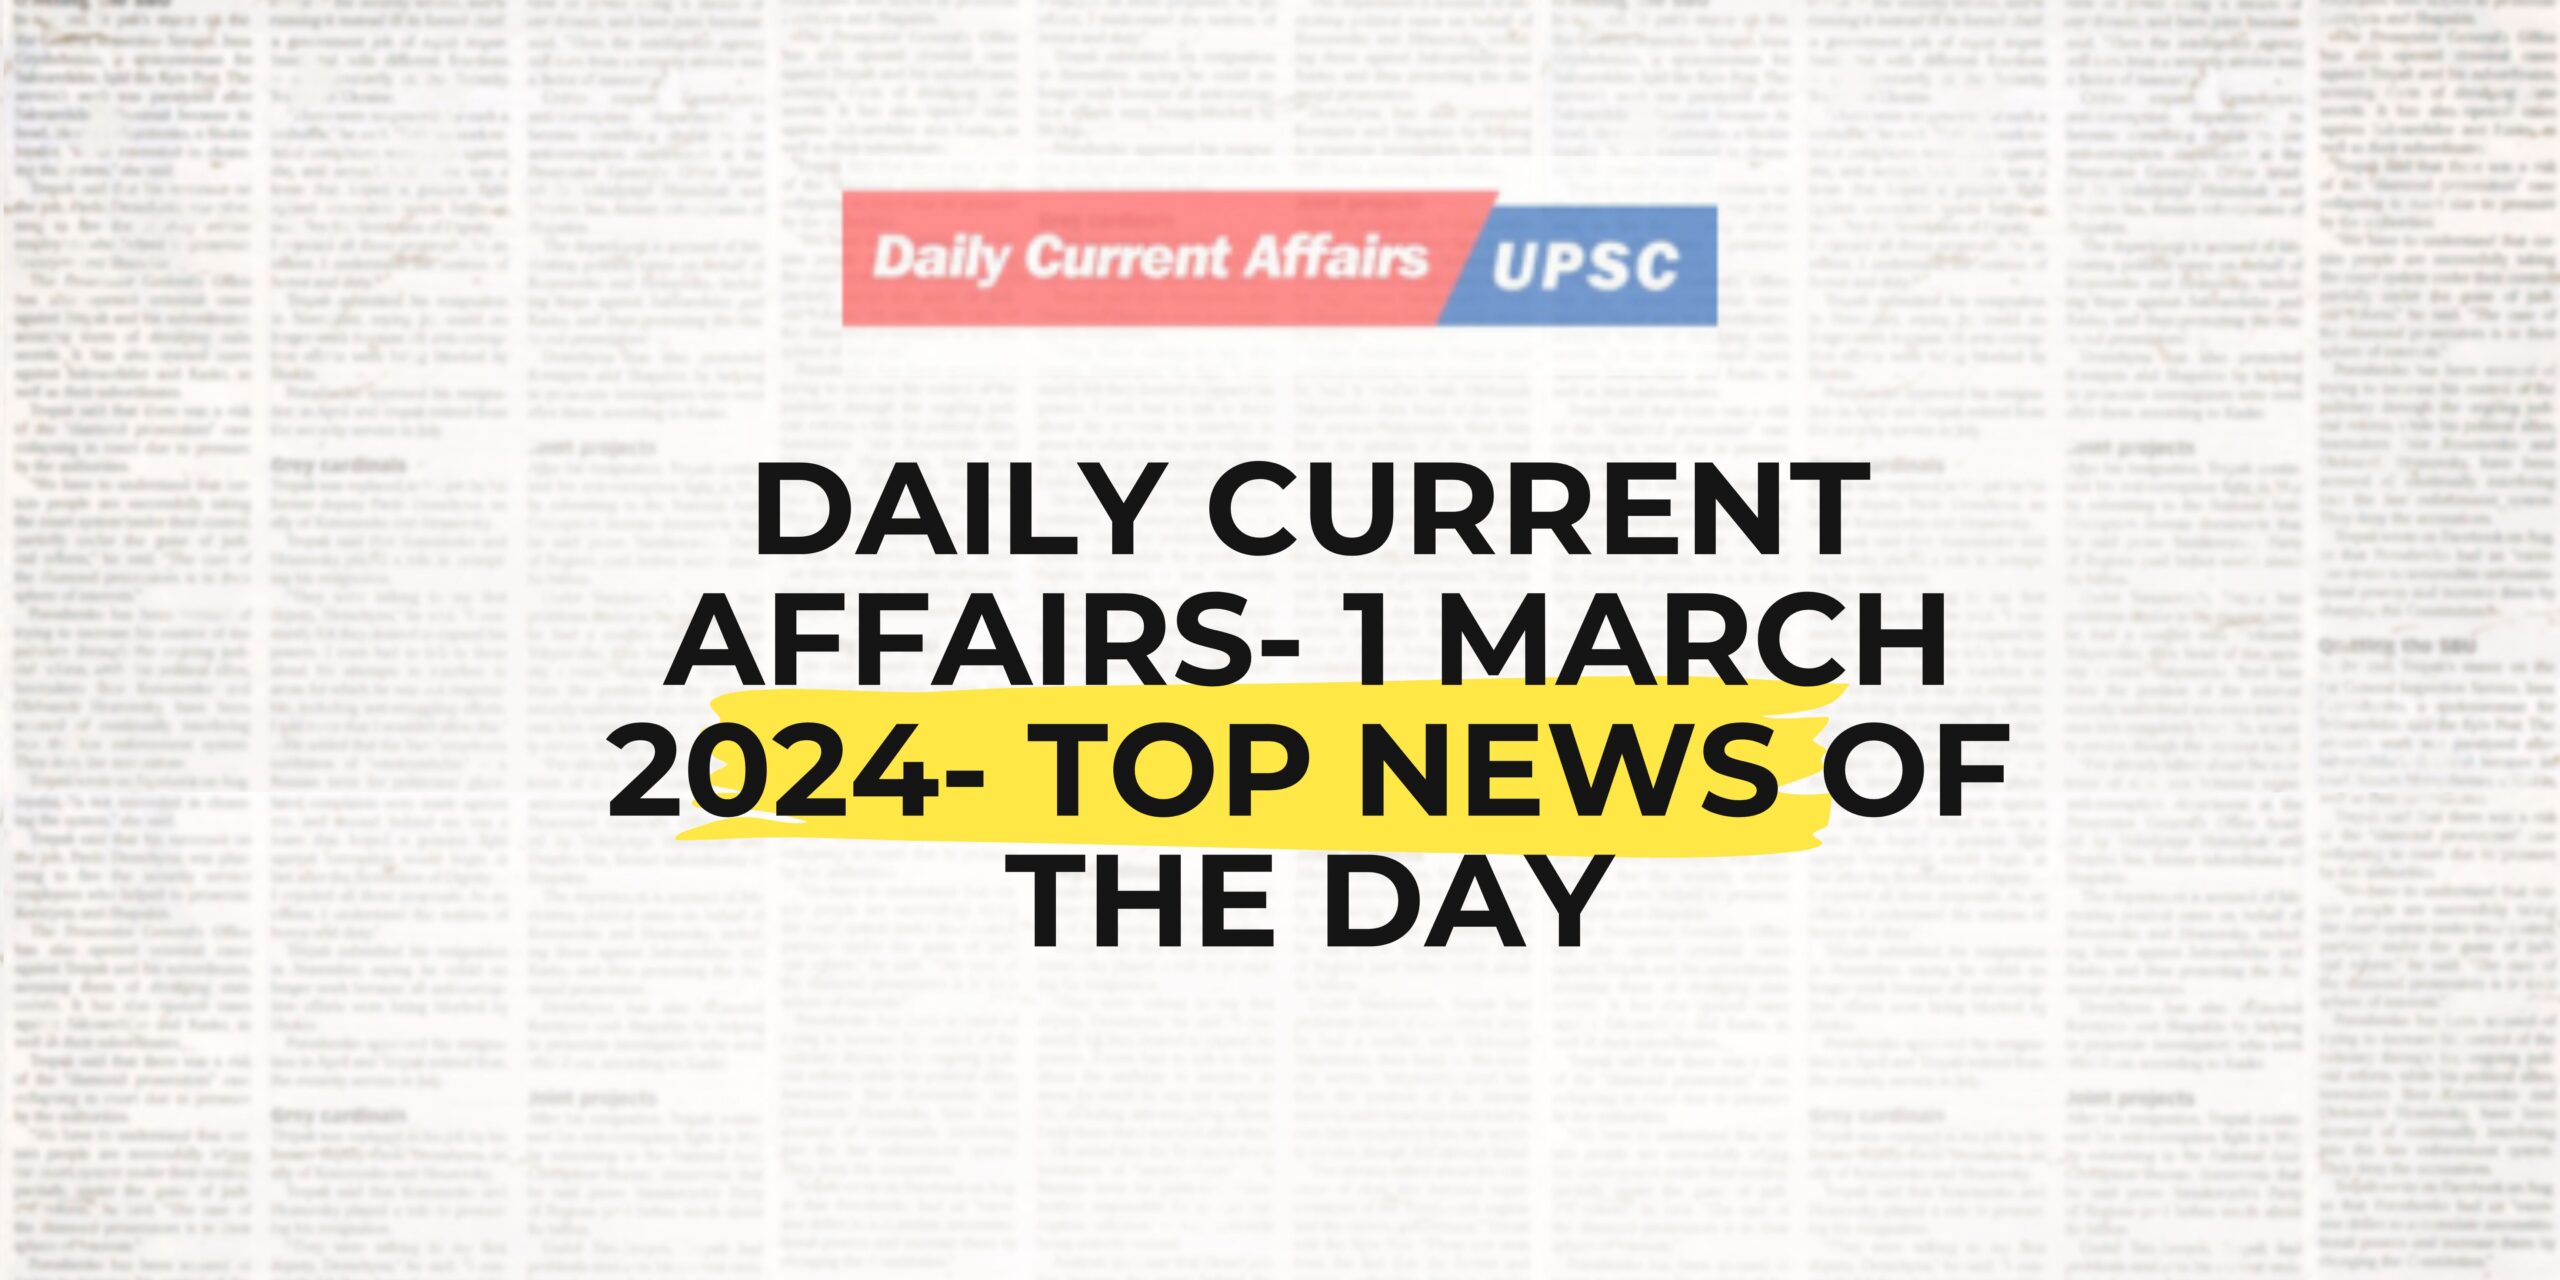 Daily Current Affairs 1 March 2024- Top News Of The Day